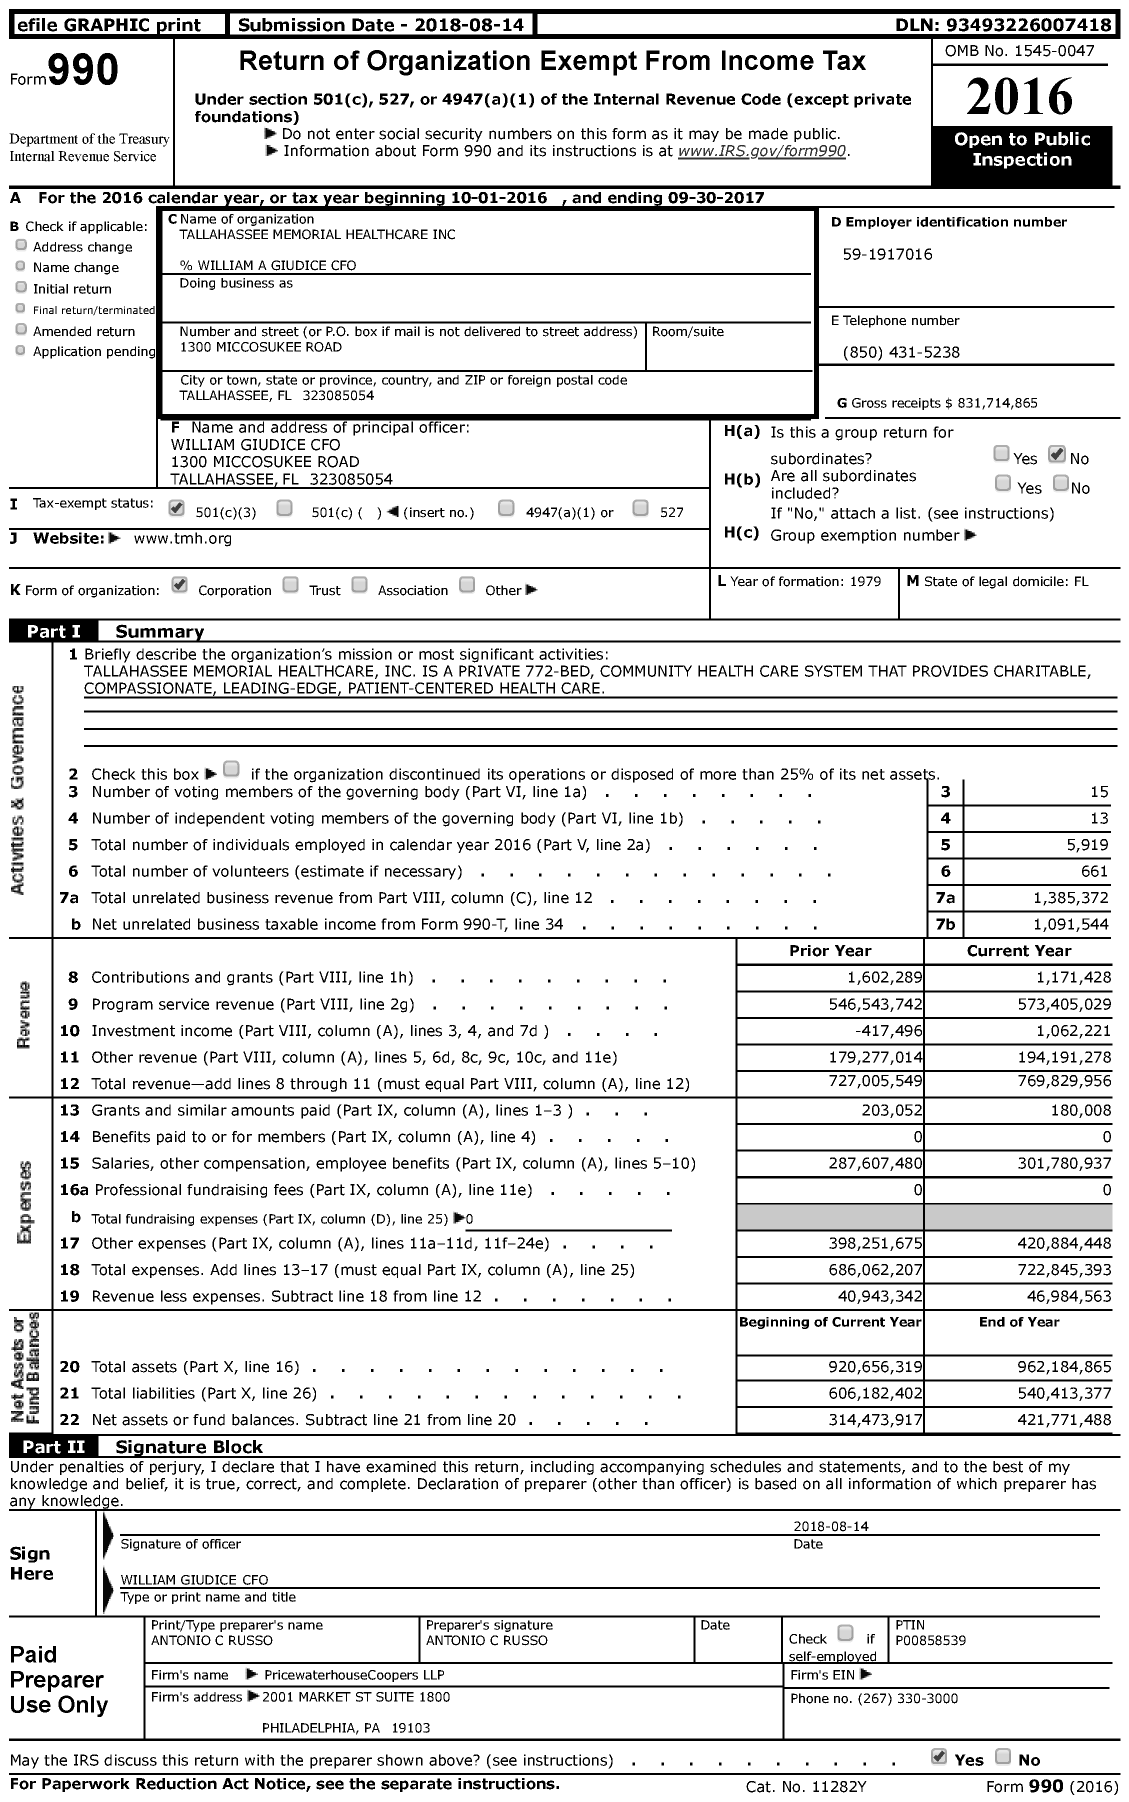 Image of first page of 2016 Form 990 for Tallahassee Memorial HealthCare (TMH)